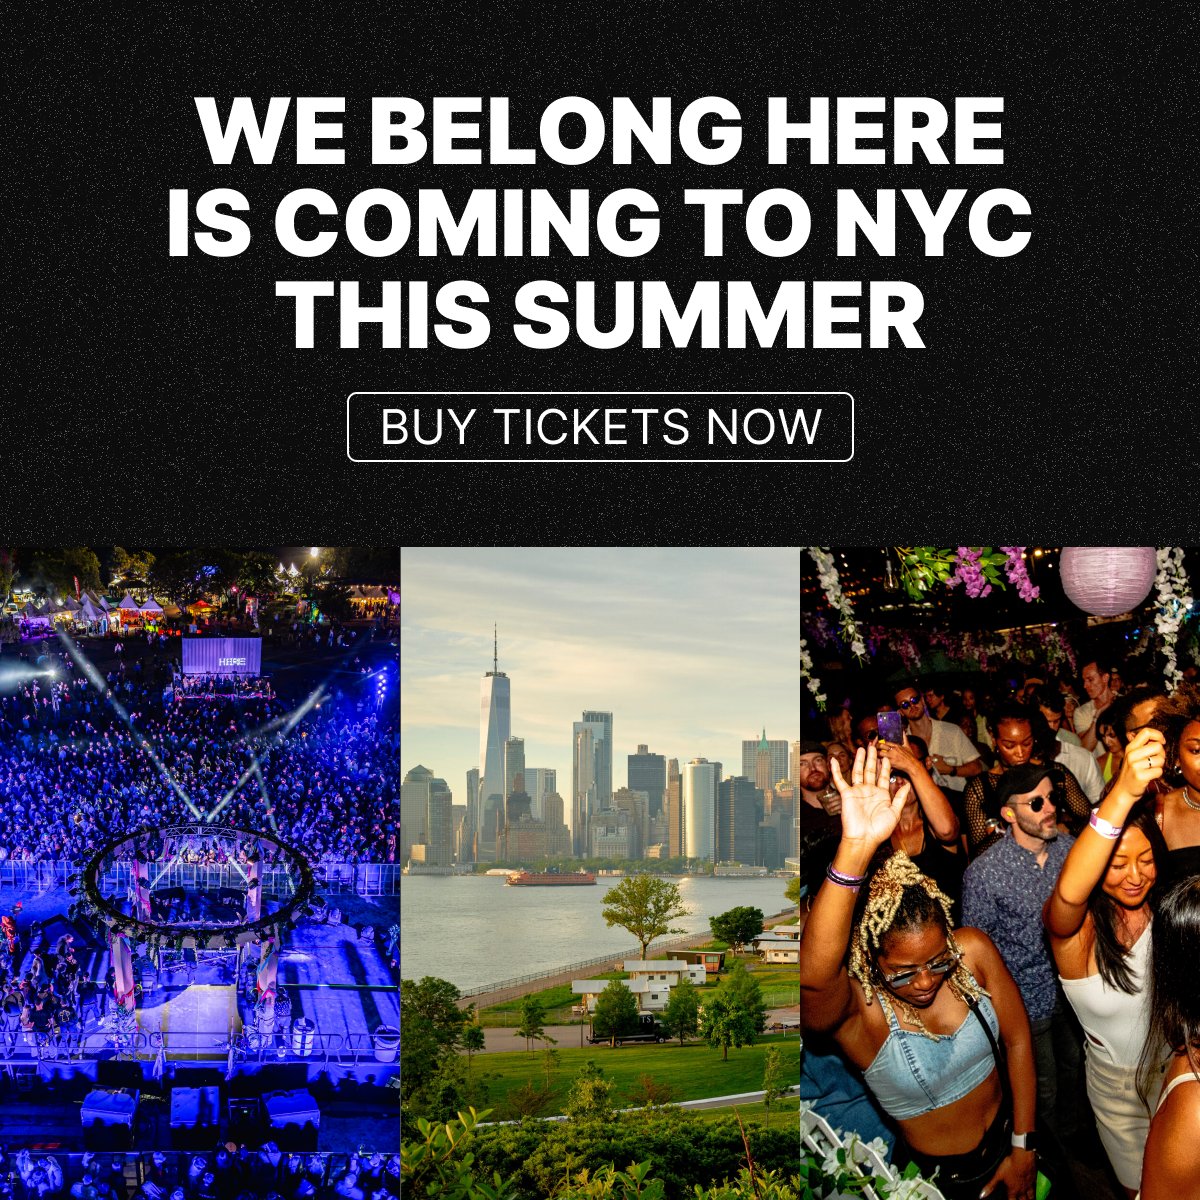 Dive into summer with the We Belong Here series on Governors Island! It's the ultimate music-driven escape, featuring an electrifying lineup including Le Youth, Aluna, Sidepiece, and more. Grab your tickets for an unforgettable start to NYC summer! t.dostuffmedia.com/t/c/s/145922